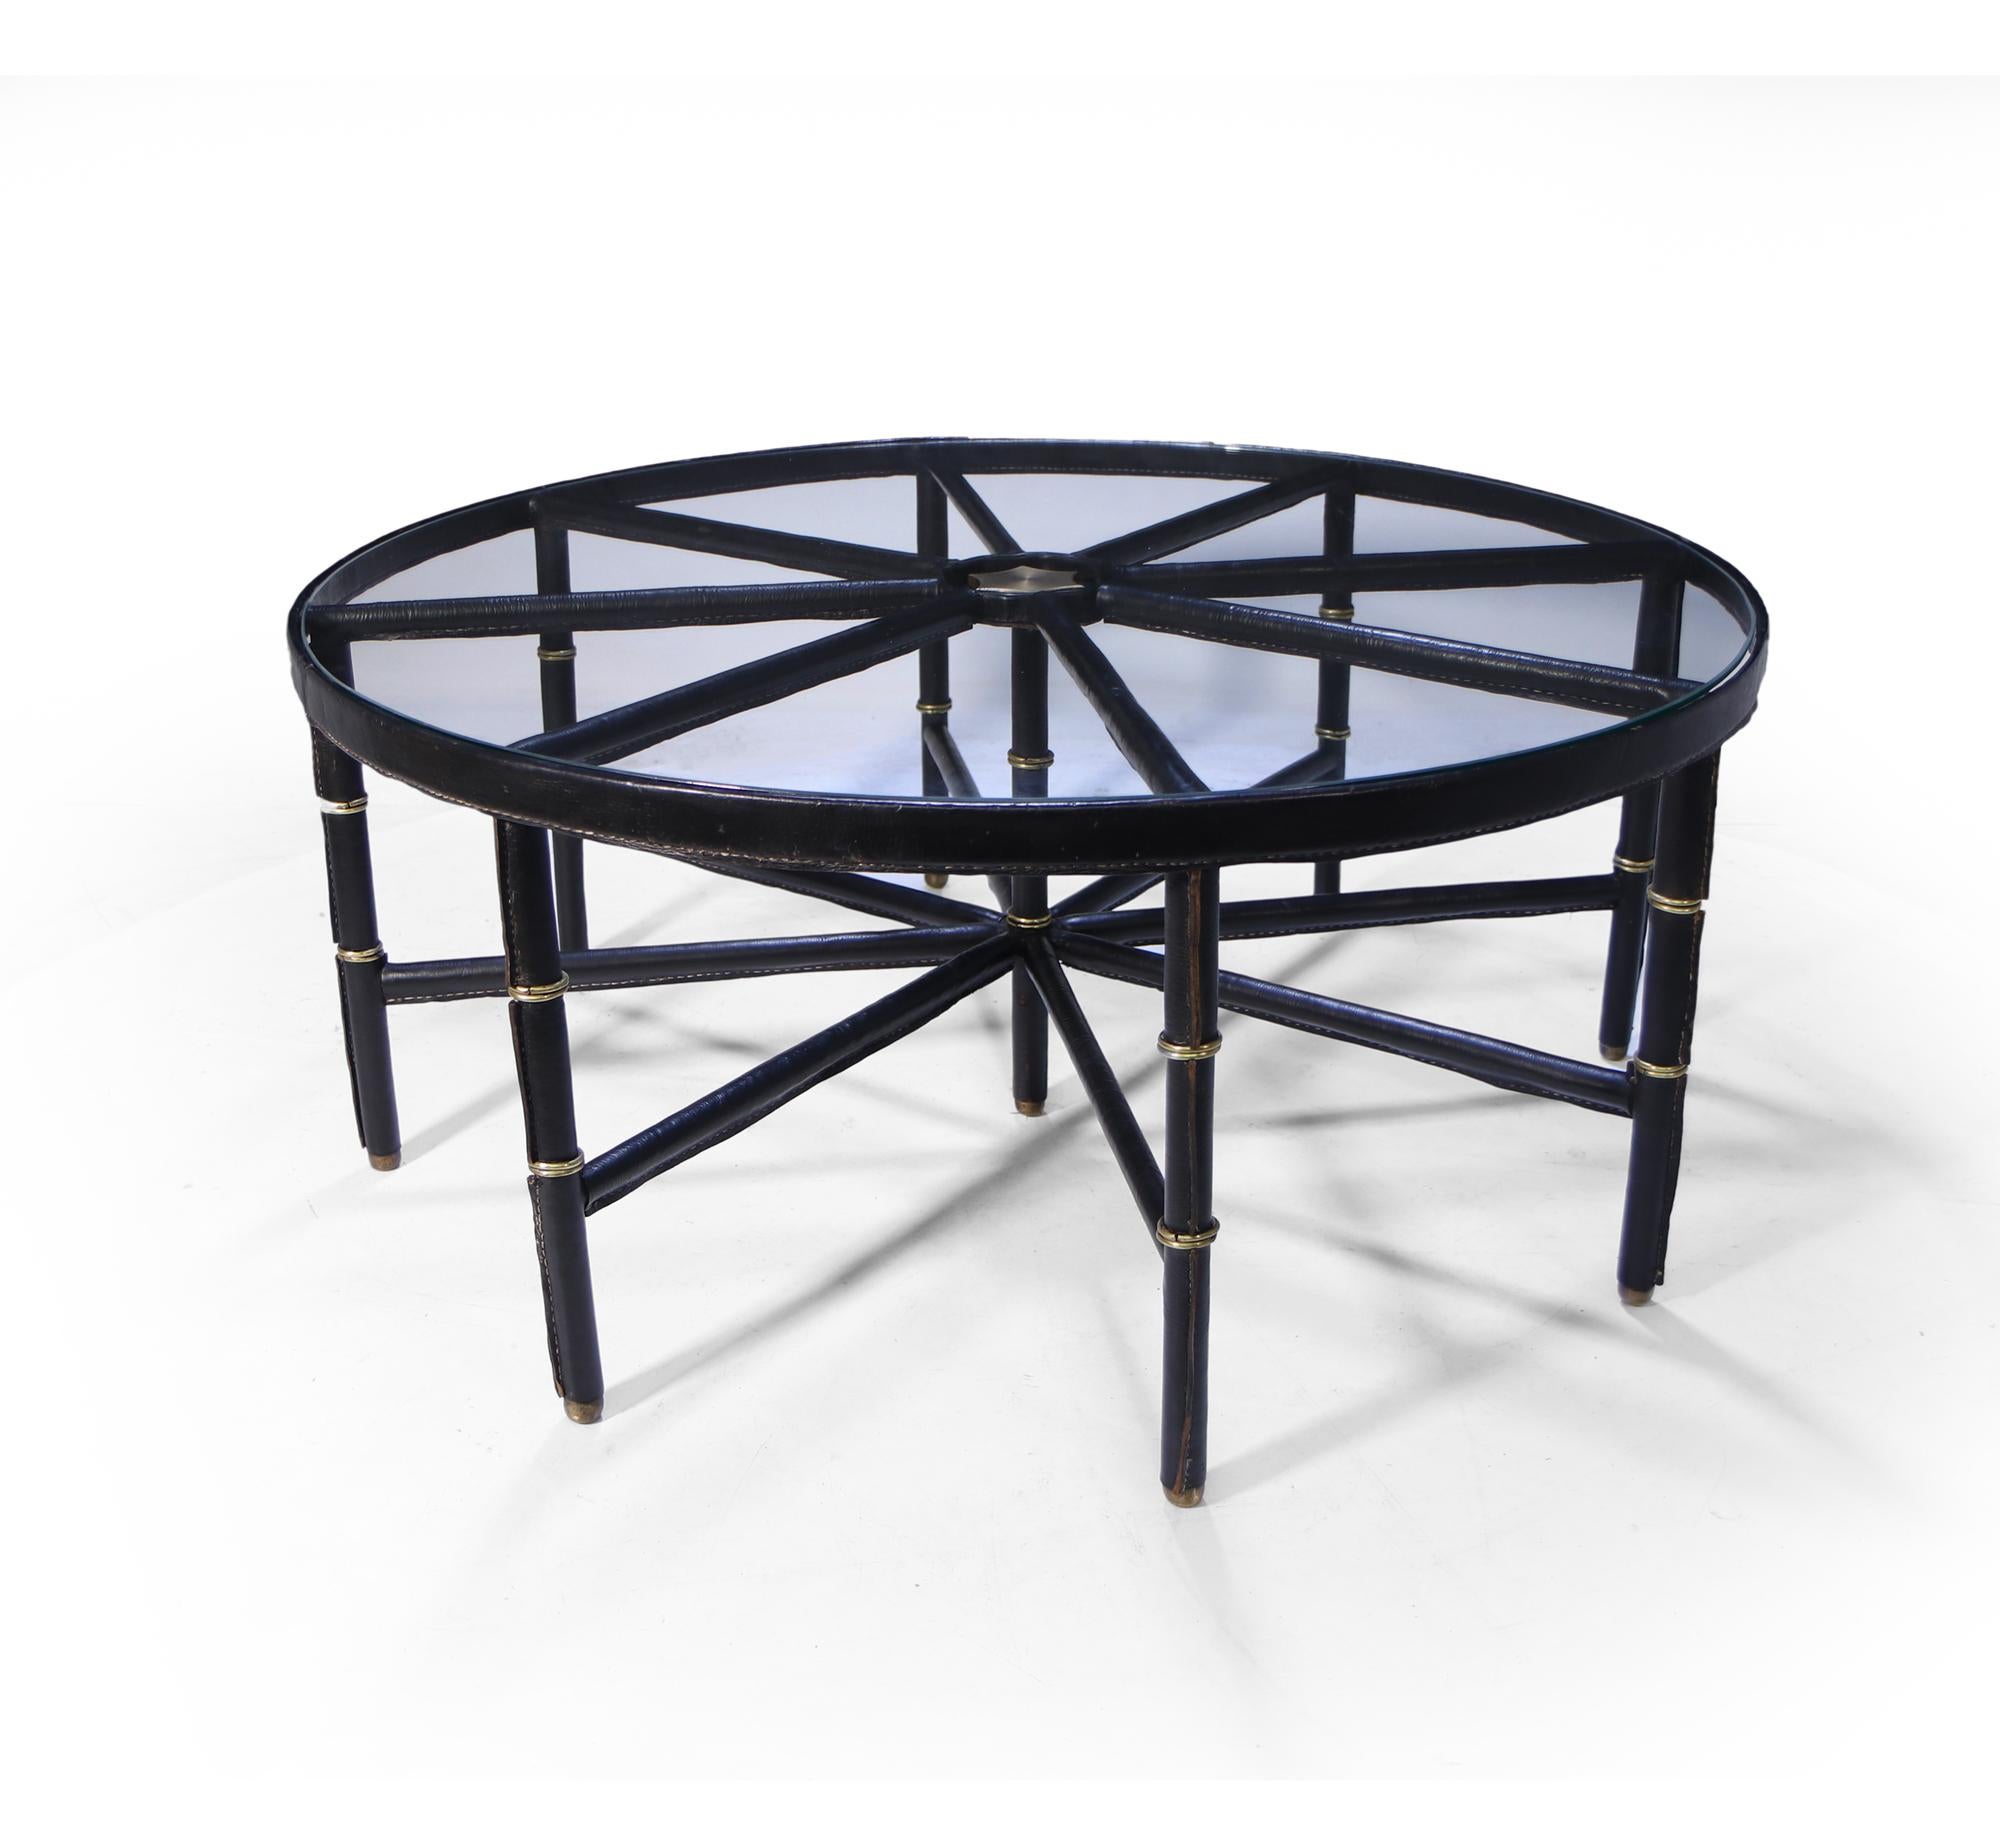 Stitched leather and brass table by Jacques Adnet

A stitched black leather and brass table with eight legs, in very good condition with a few scuffs to the leather here and there, this table appears on the front page of The Jacques Adnet book